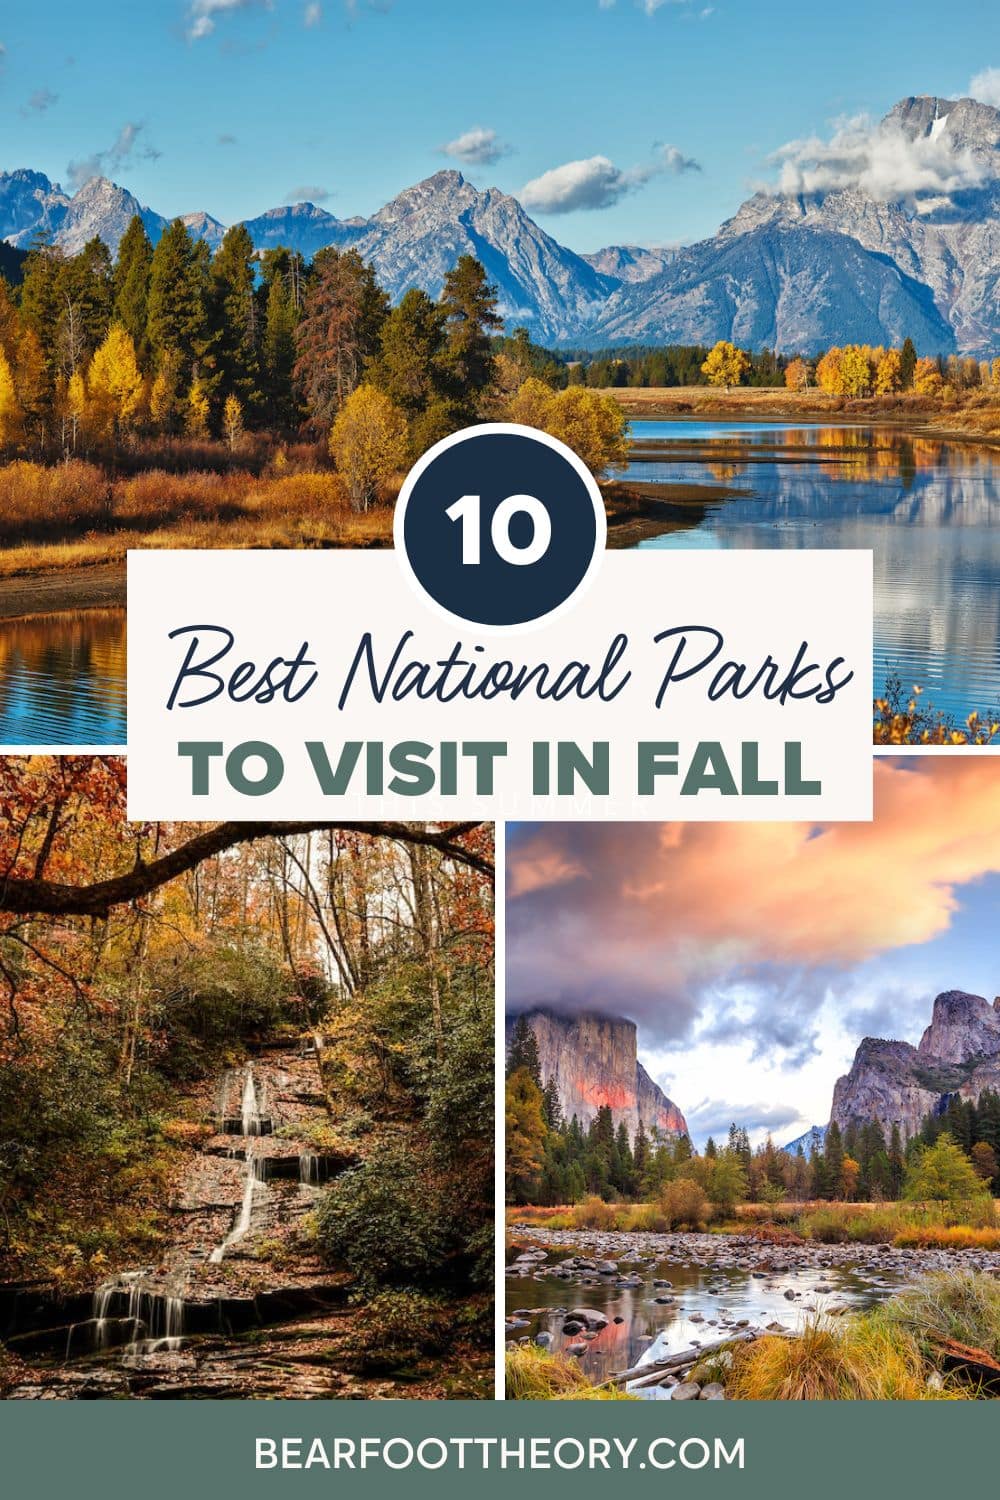 Check out the best National Parks to visit in fall for a leaf-peeping road trip, plus tips for exploring from the car or the trail.